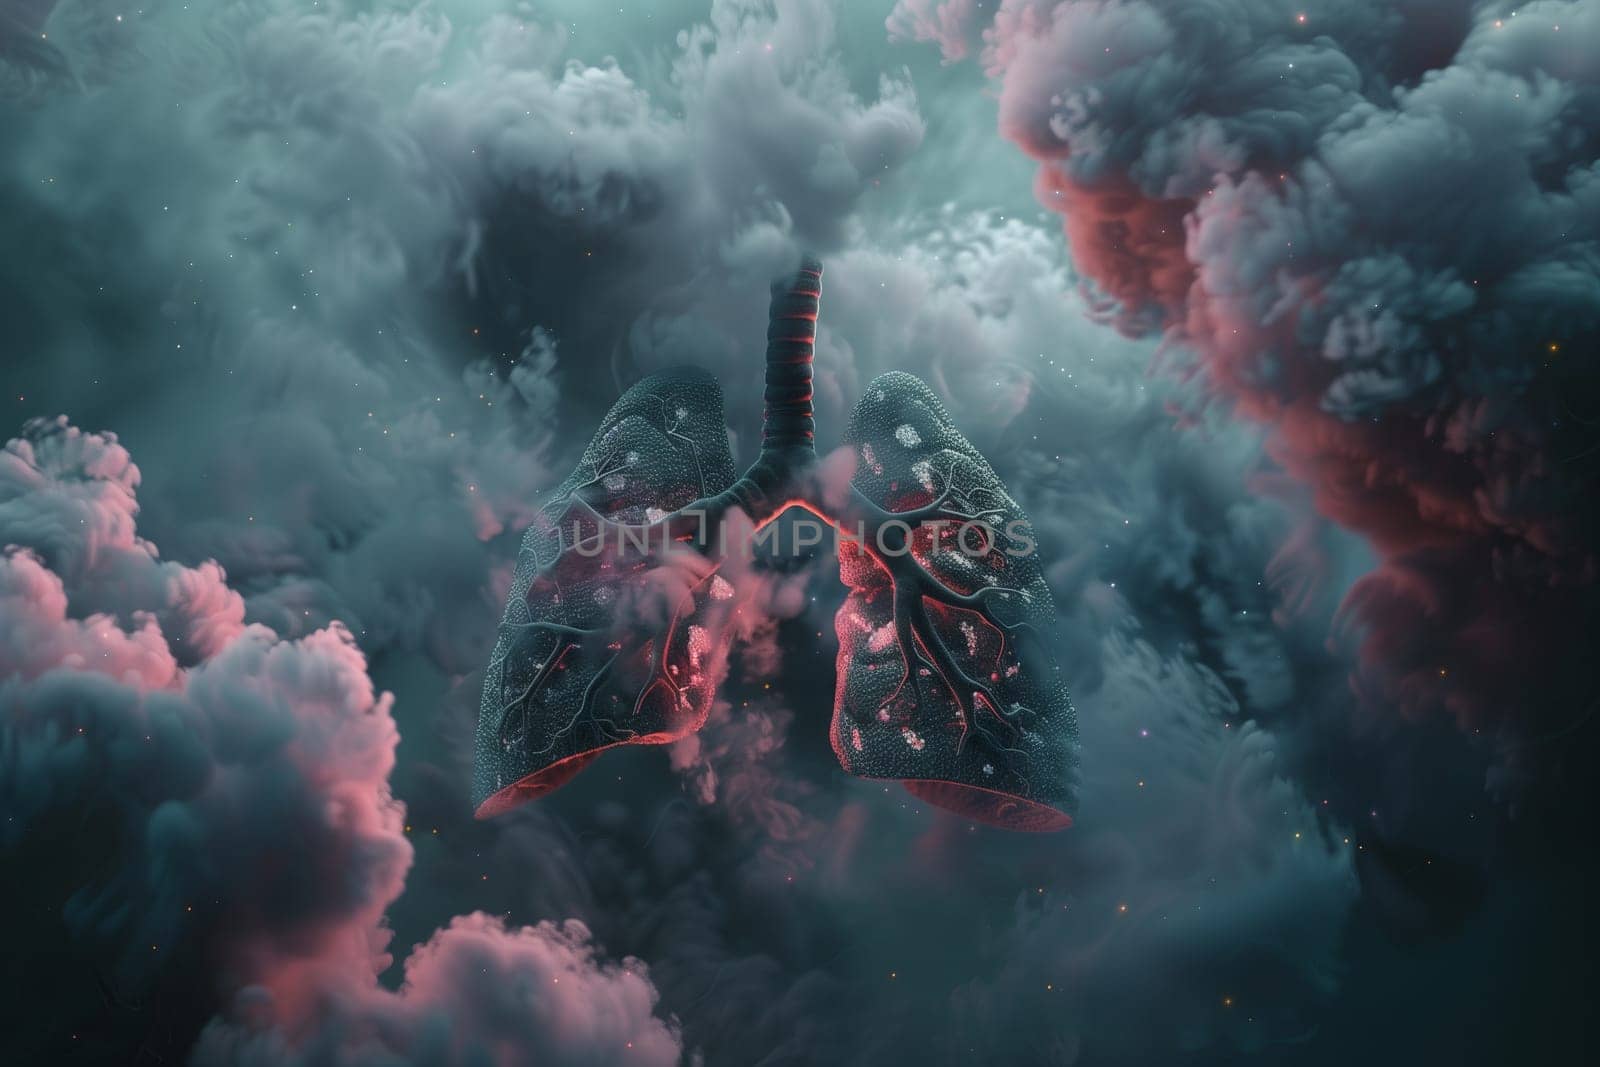 The fictional characters lungs were submerged underwater, floating in the clouds of a polluted landscape. The event was like a dark, smoky art installation